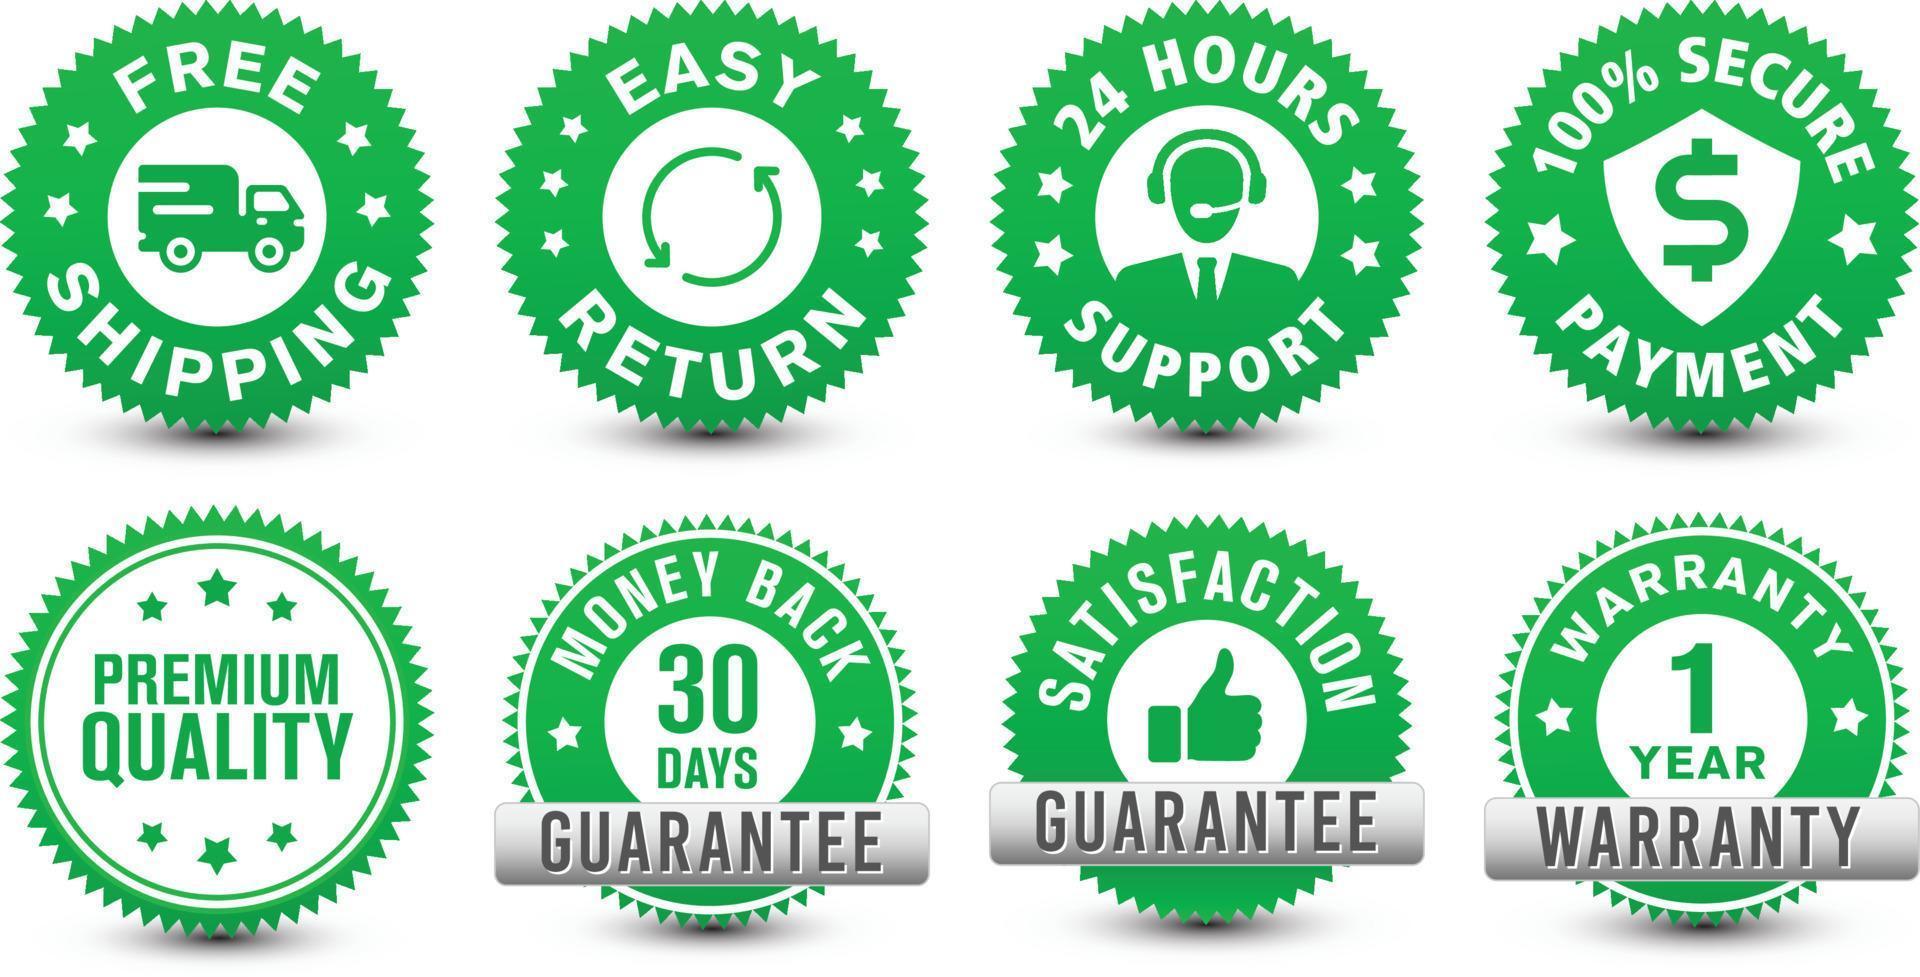 Money back, warranty, 24 hour support, etc. different type of online ecommerce security green badges isolated on white background. vector